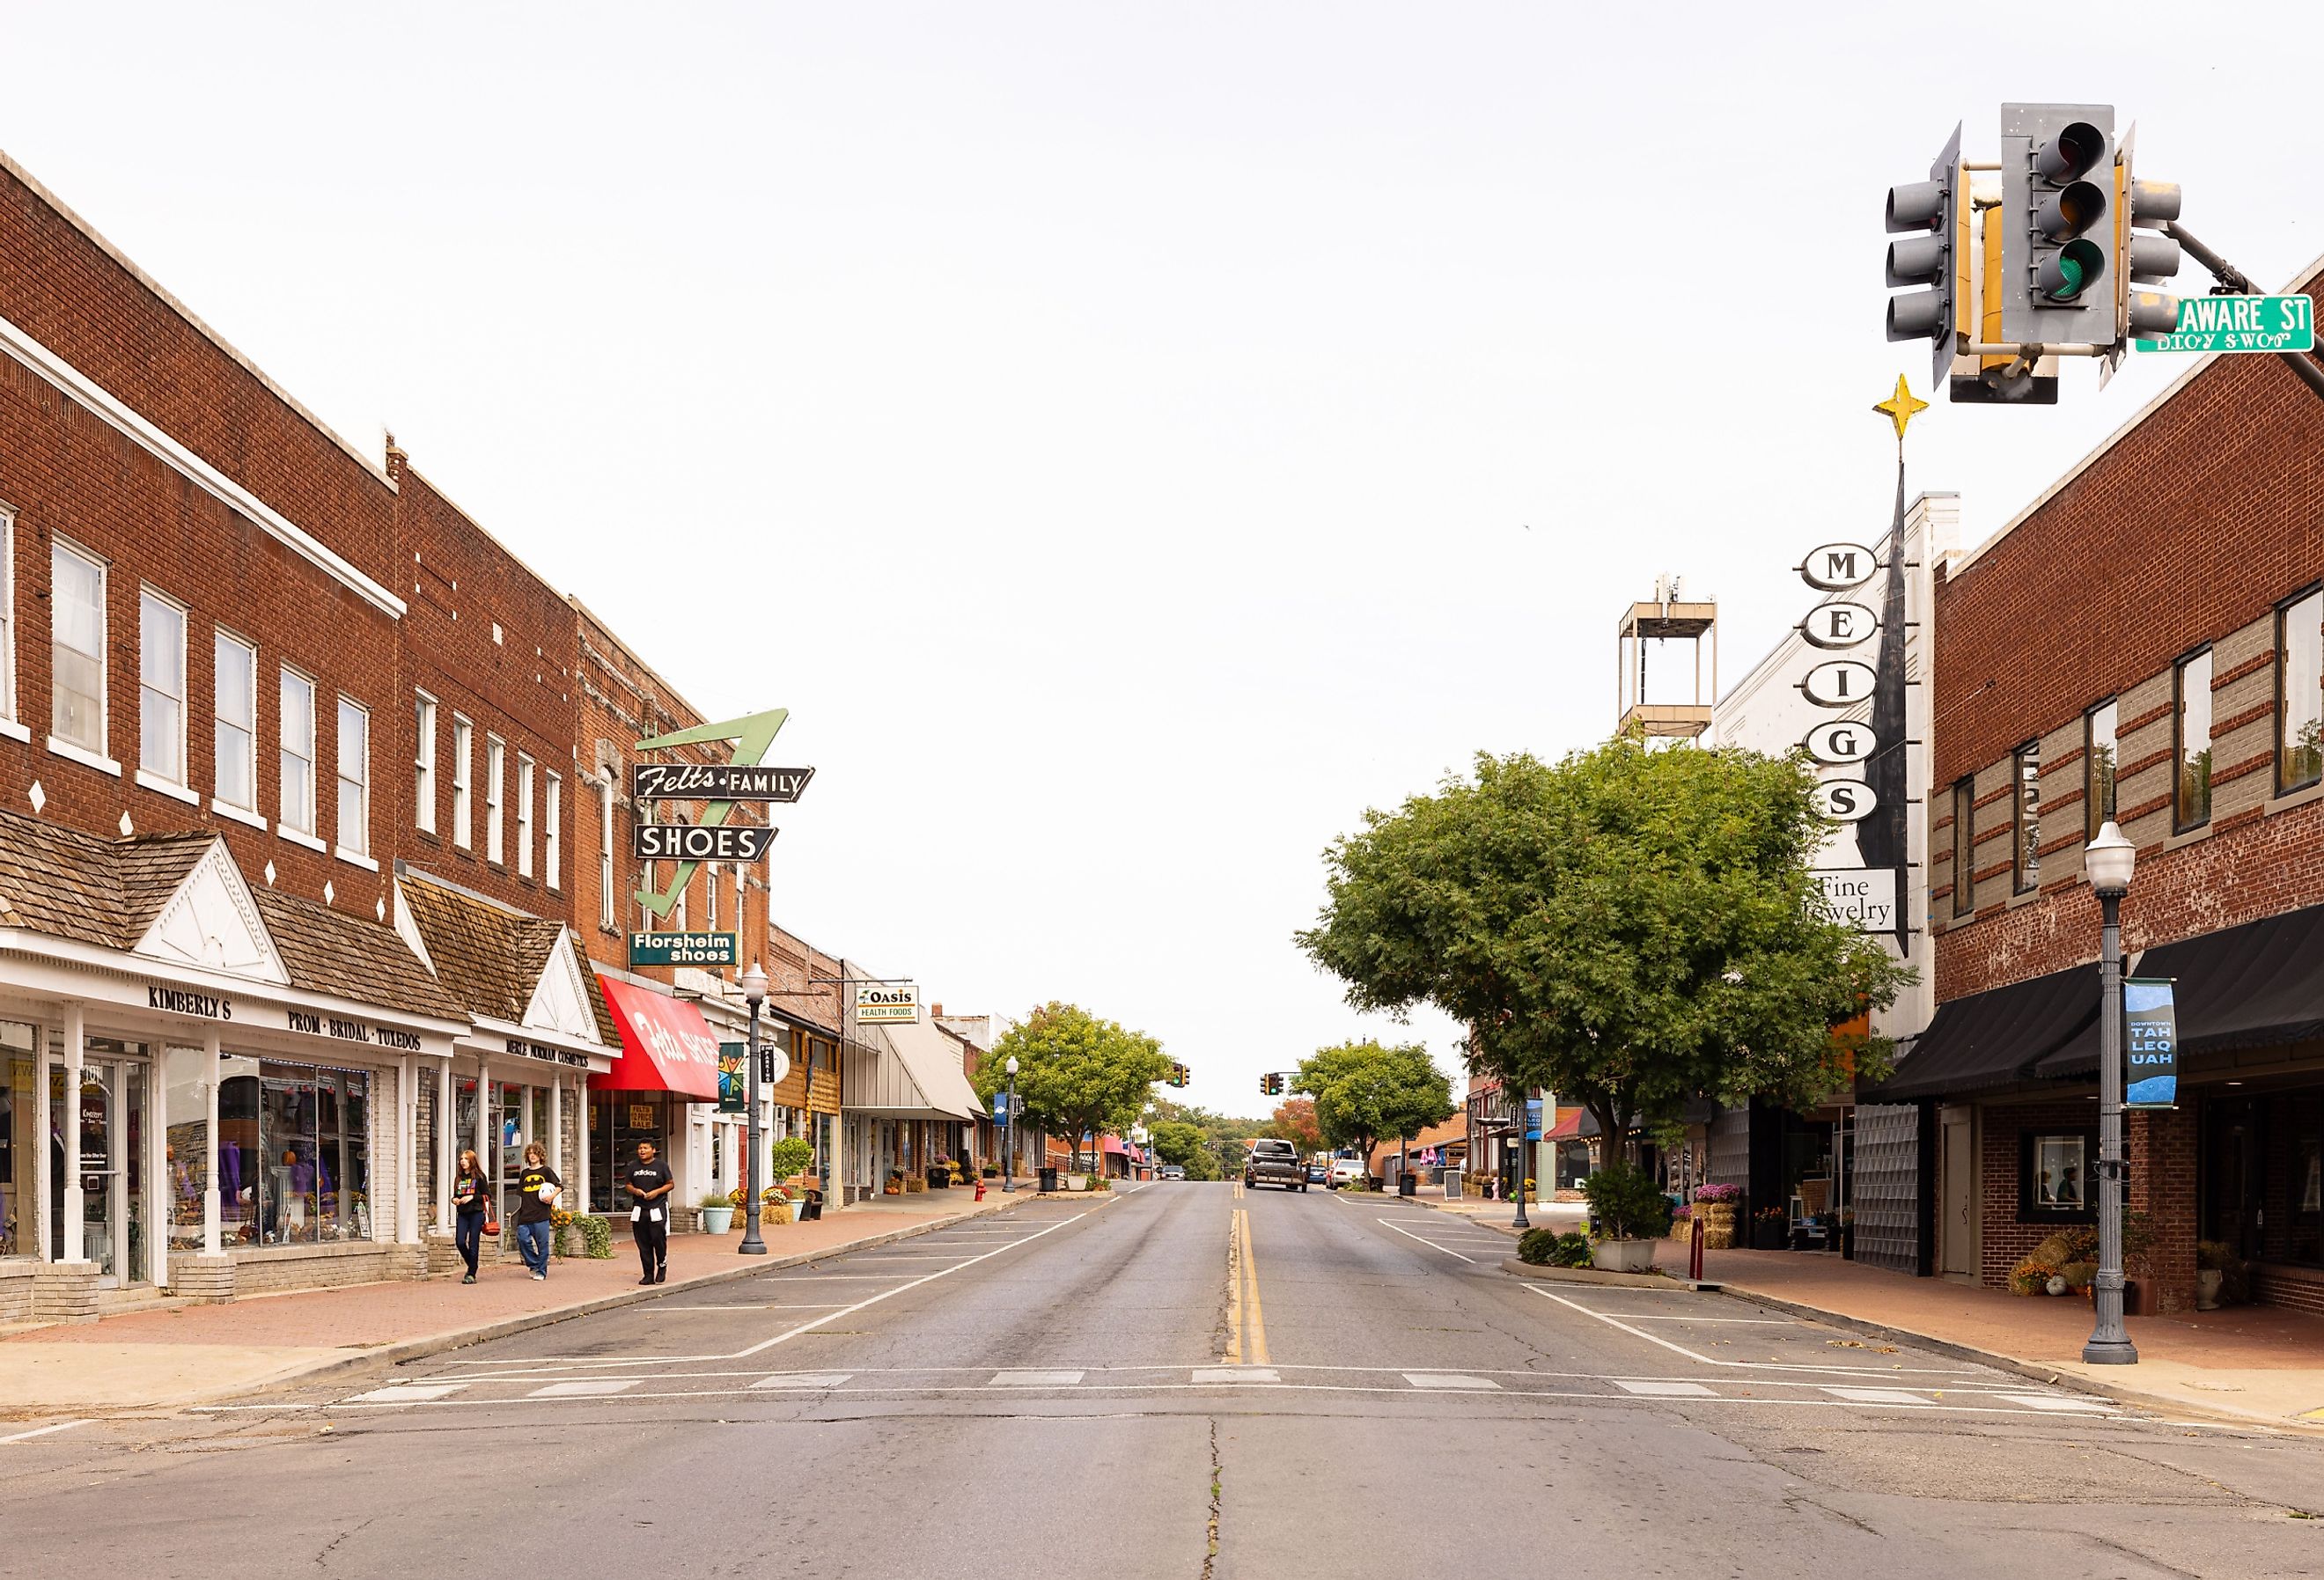 The old business district on Muskogee Avenue in Tahlequah, Oklahoma. Image credit Roberto Galan via Shutterstock.